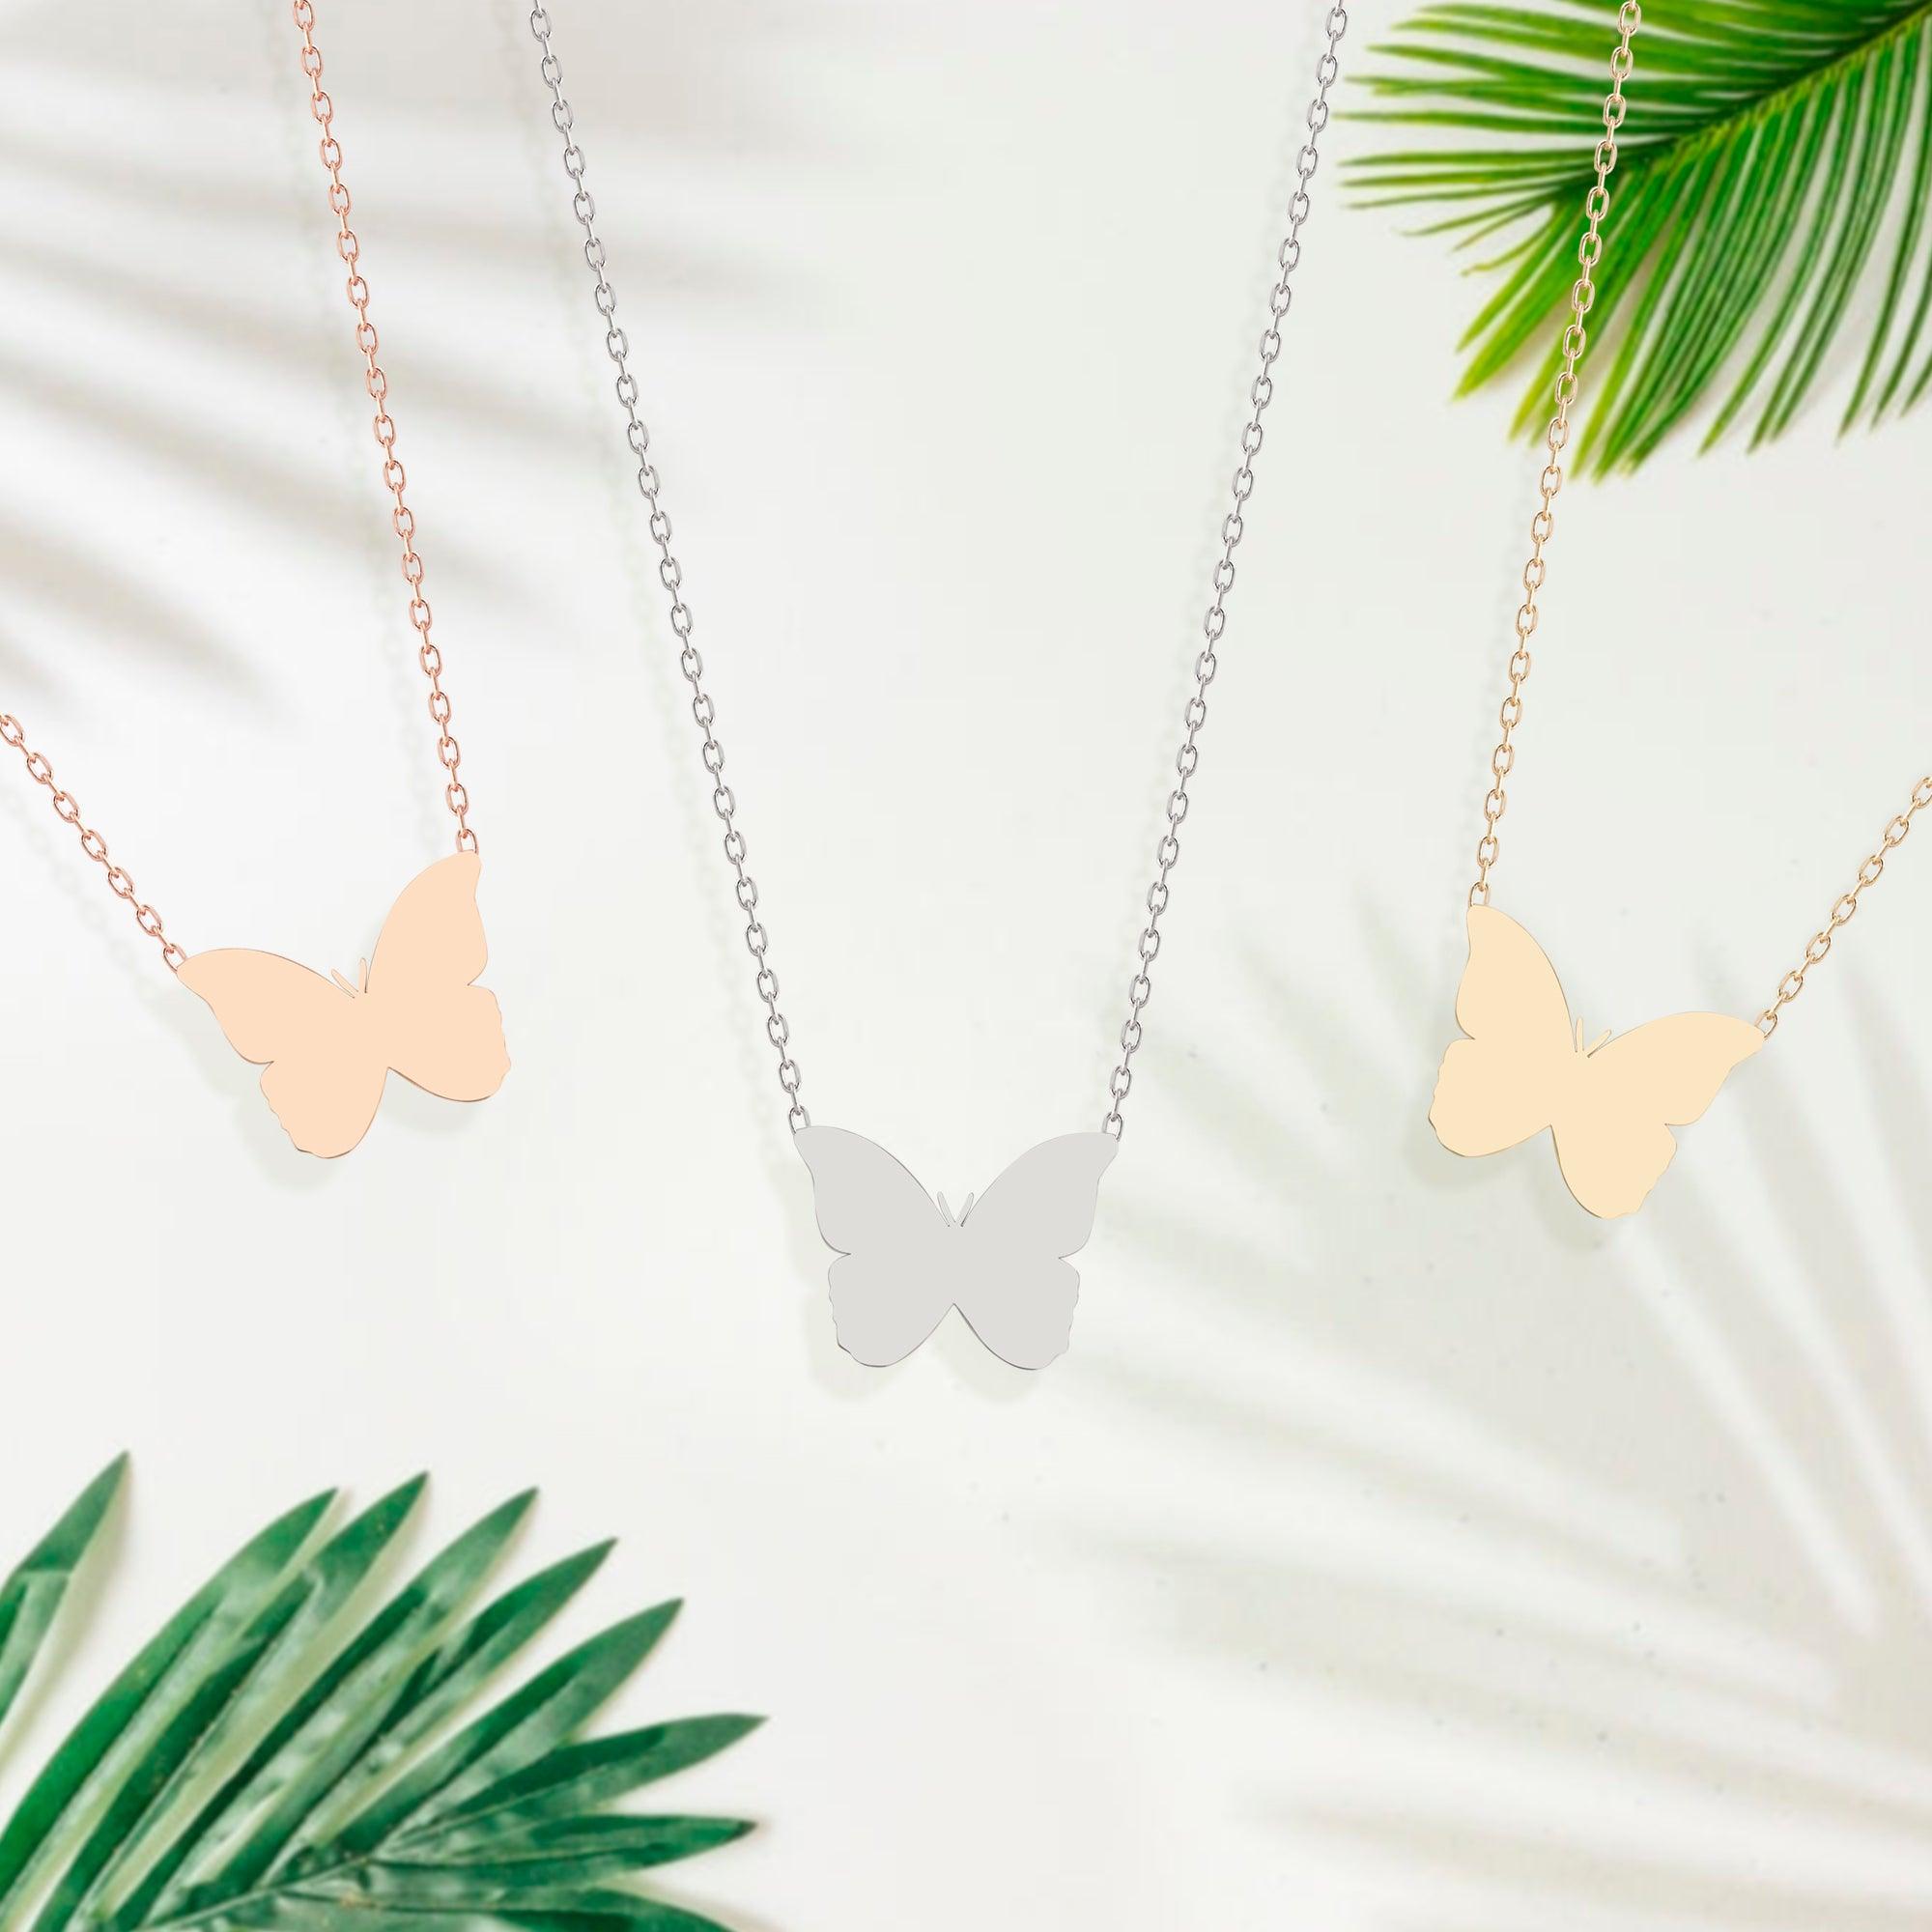 Buy Delicate M Initial Necklace, Butterfly Gold Initial Necklace, M Letter  Necklace, Monogram Necklace, Girlfriend Gift, Best Friend Gift Online in  India - Etsy